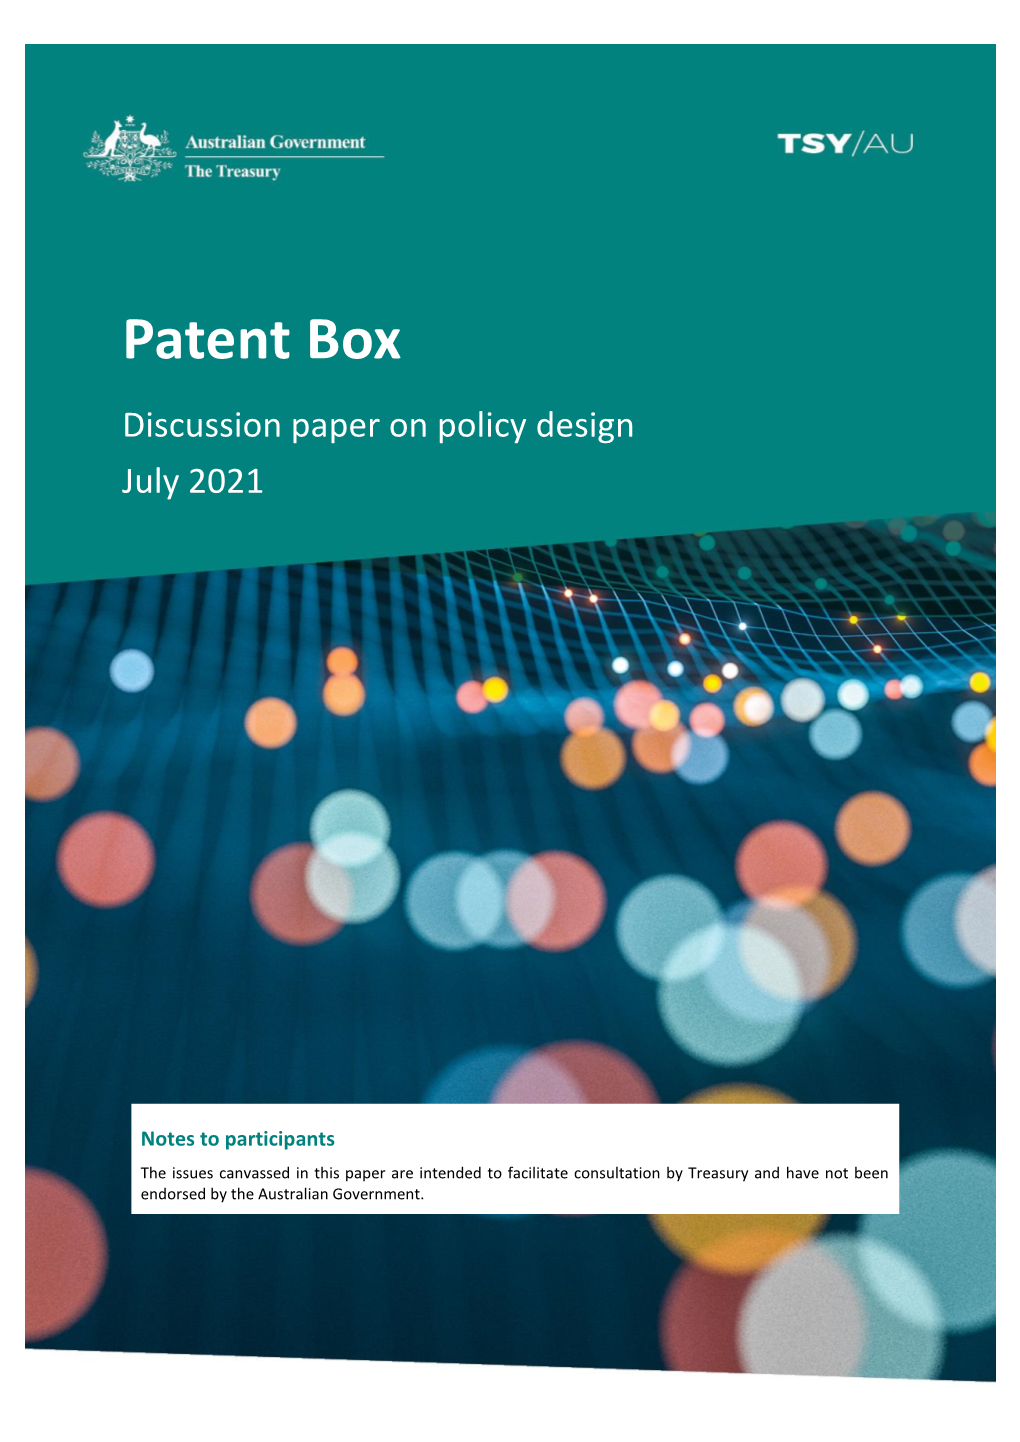 Patent Box Discussion Paper on Policy Design